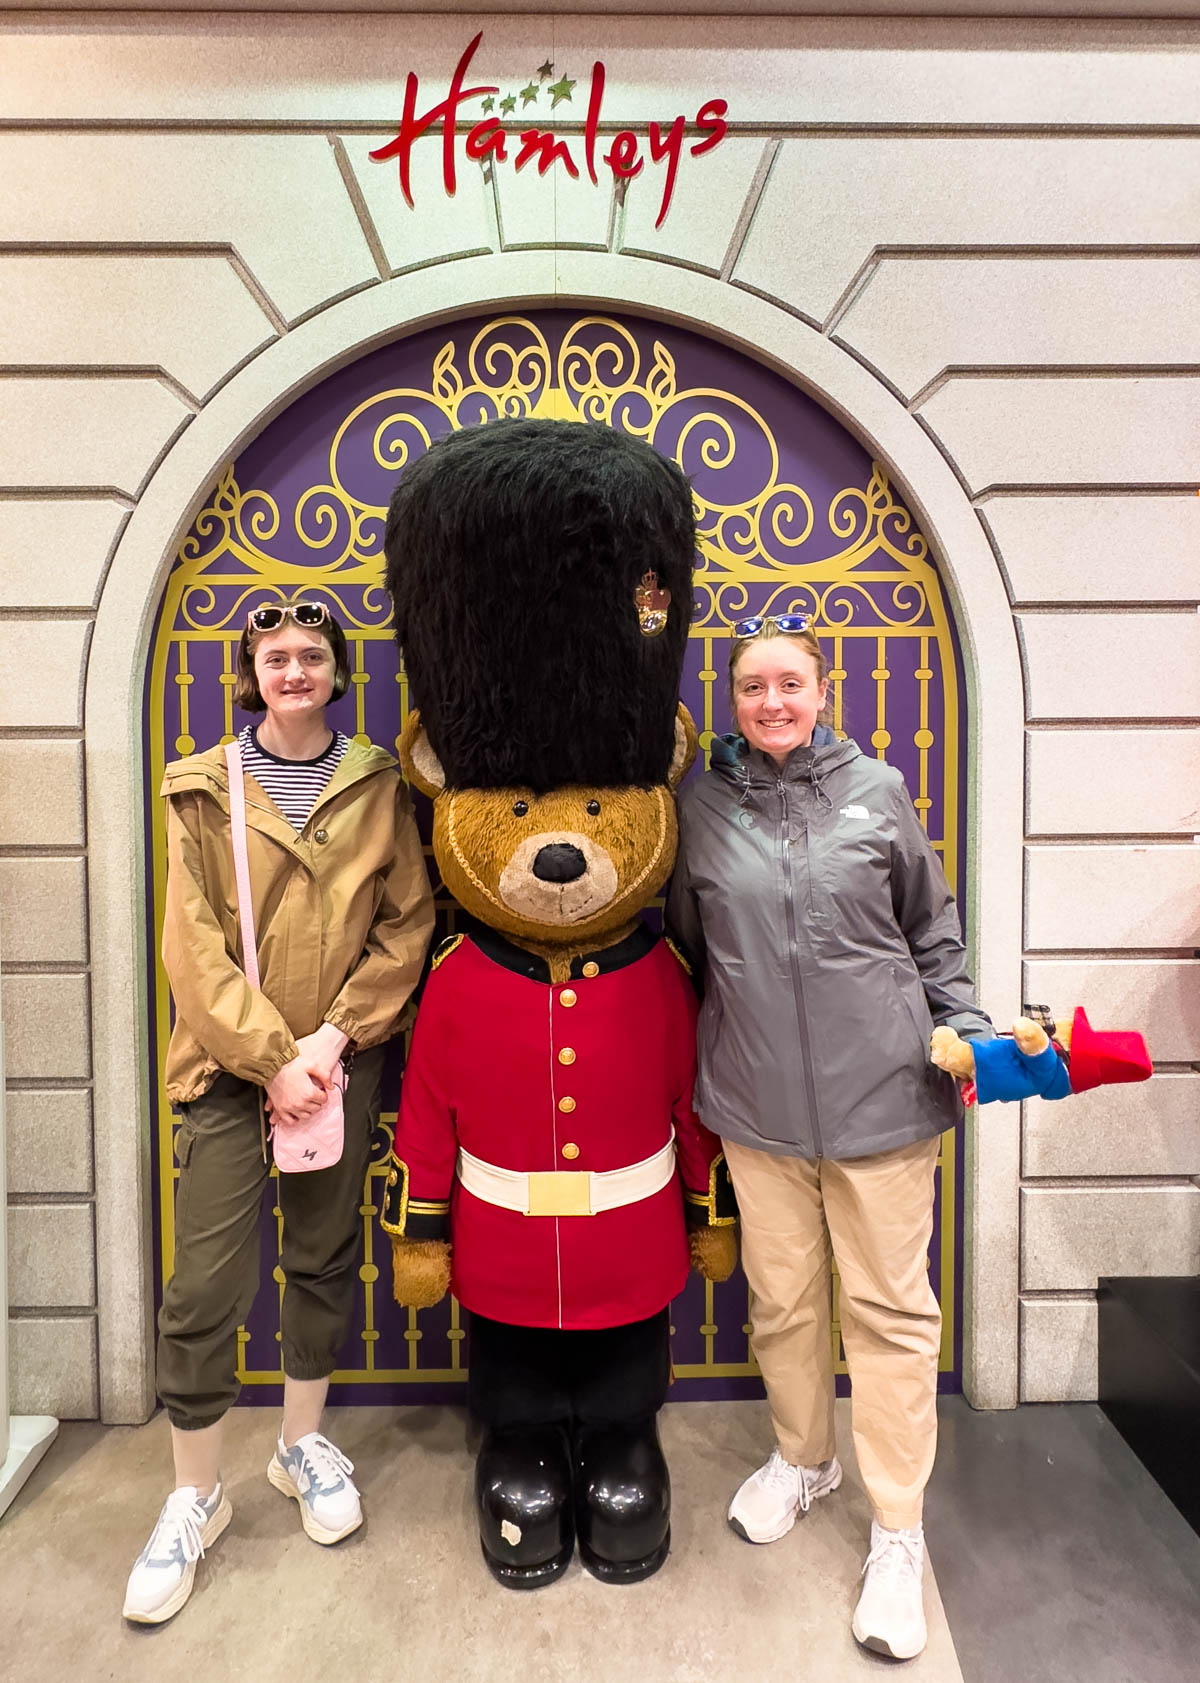 Two young girls stand with a toy bear dressed like a London guard.